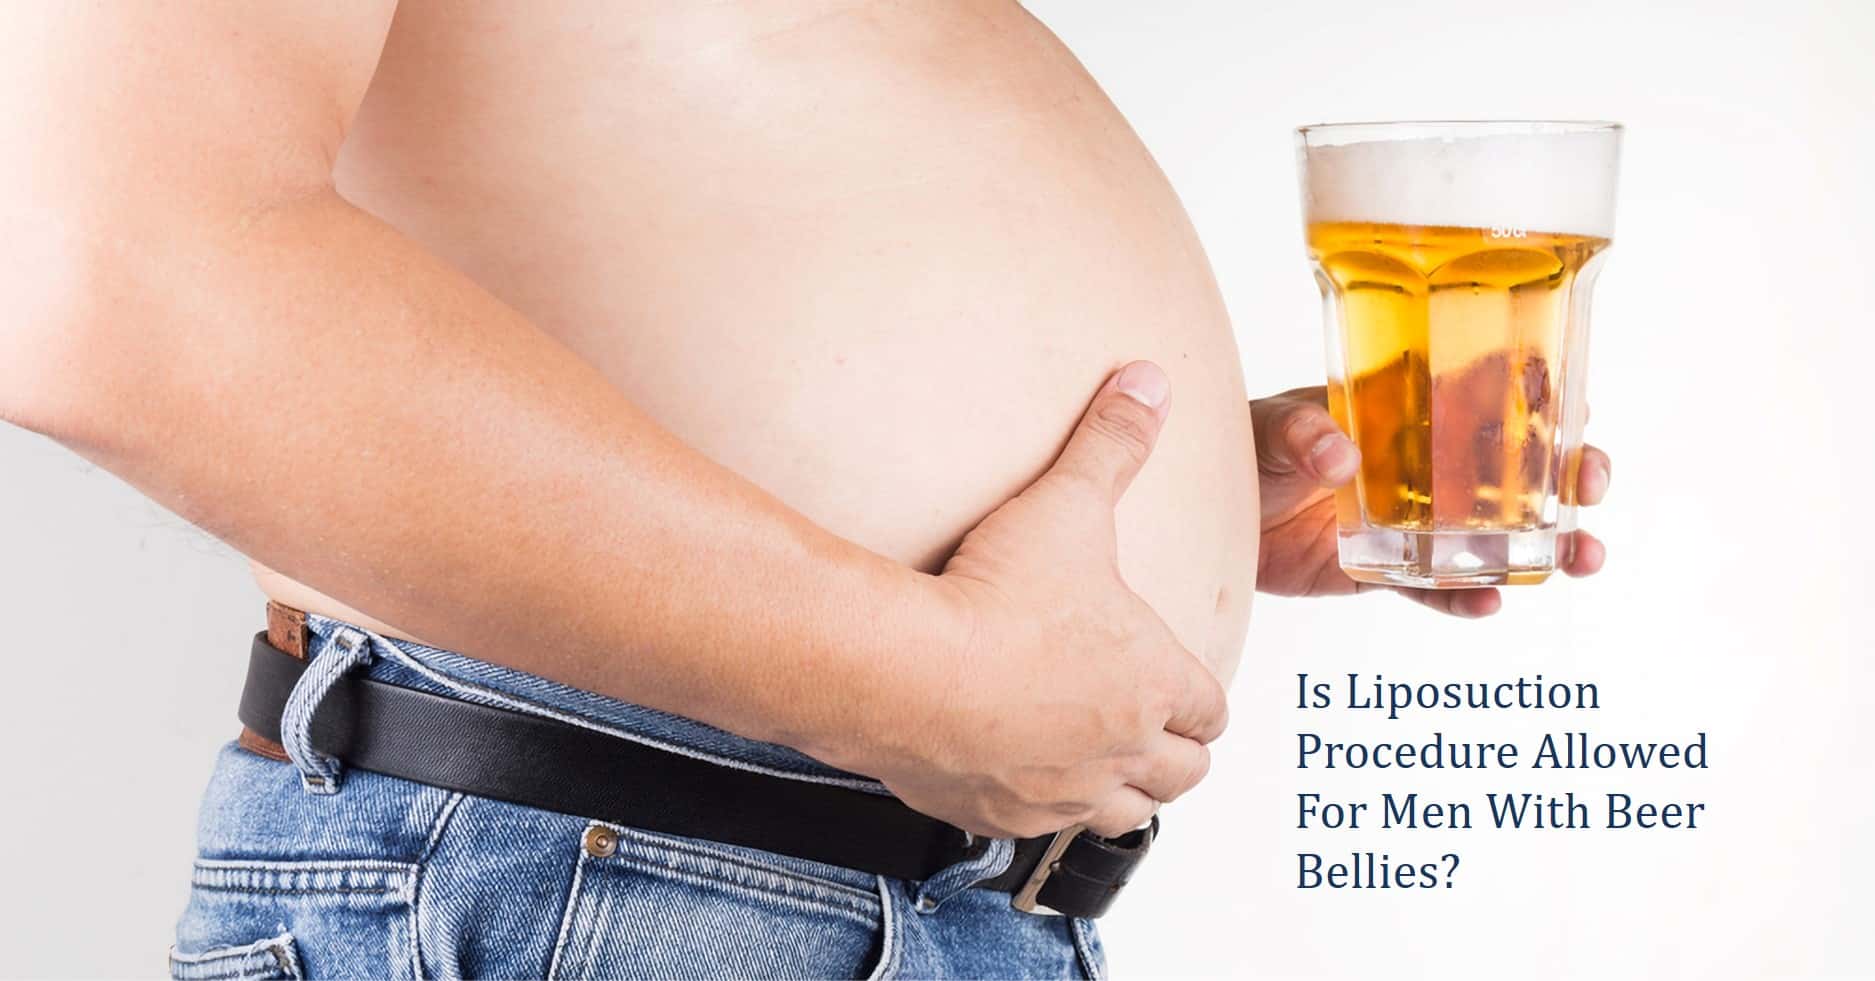 Removing A Beer Belly With Liposuction: Does it Work?